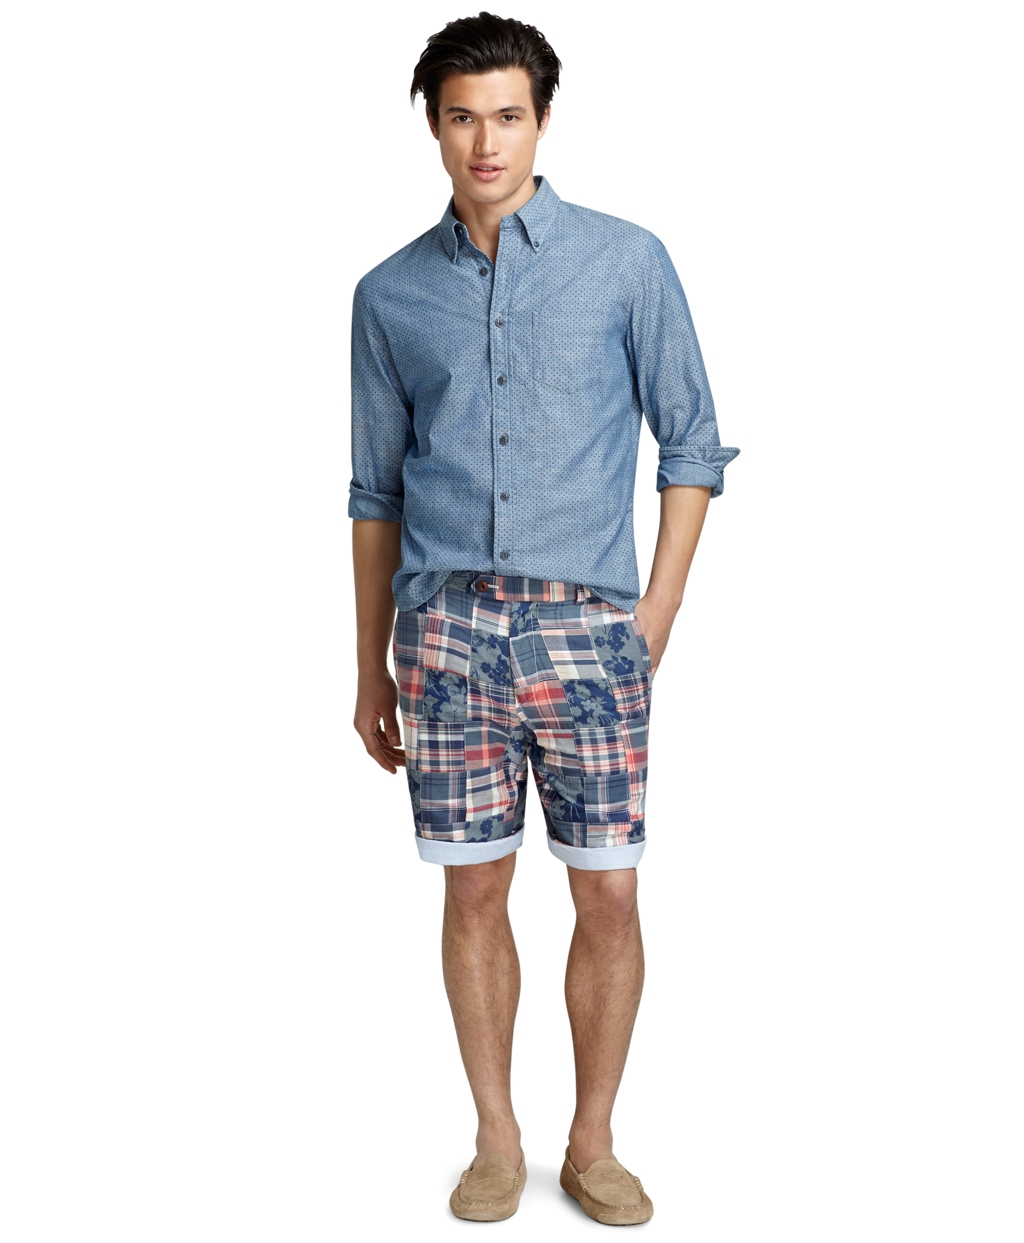 Lyst - Brooks Brothers Oxford-Lined Madras Patchwork Shorts for Men